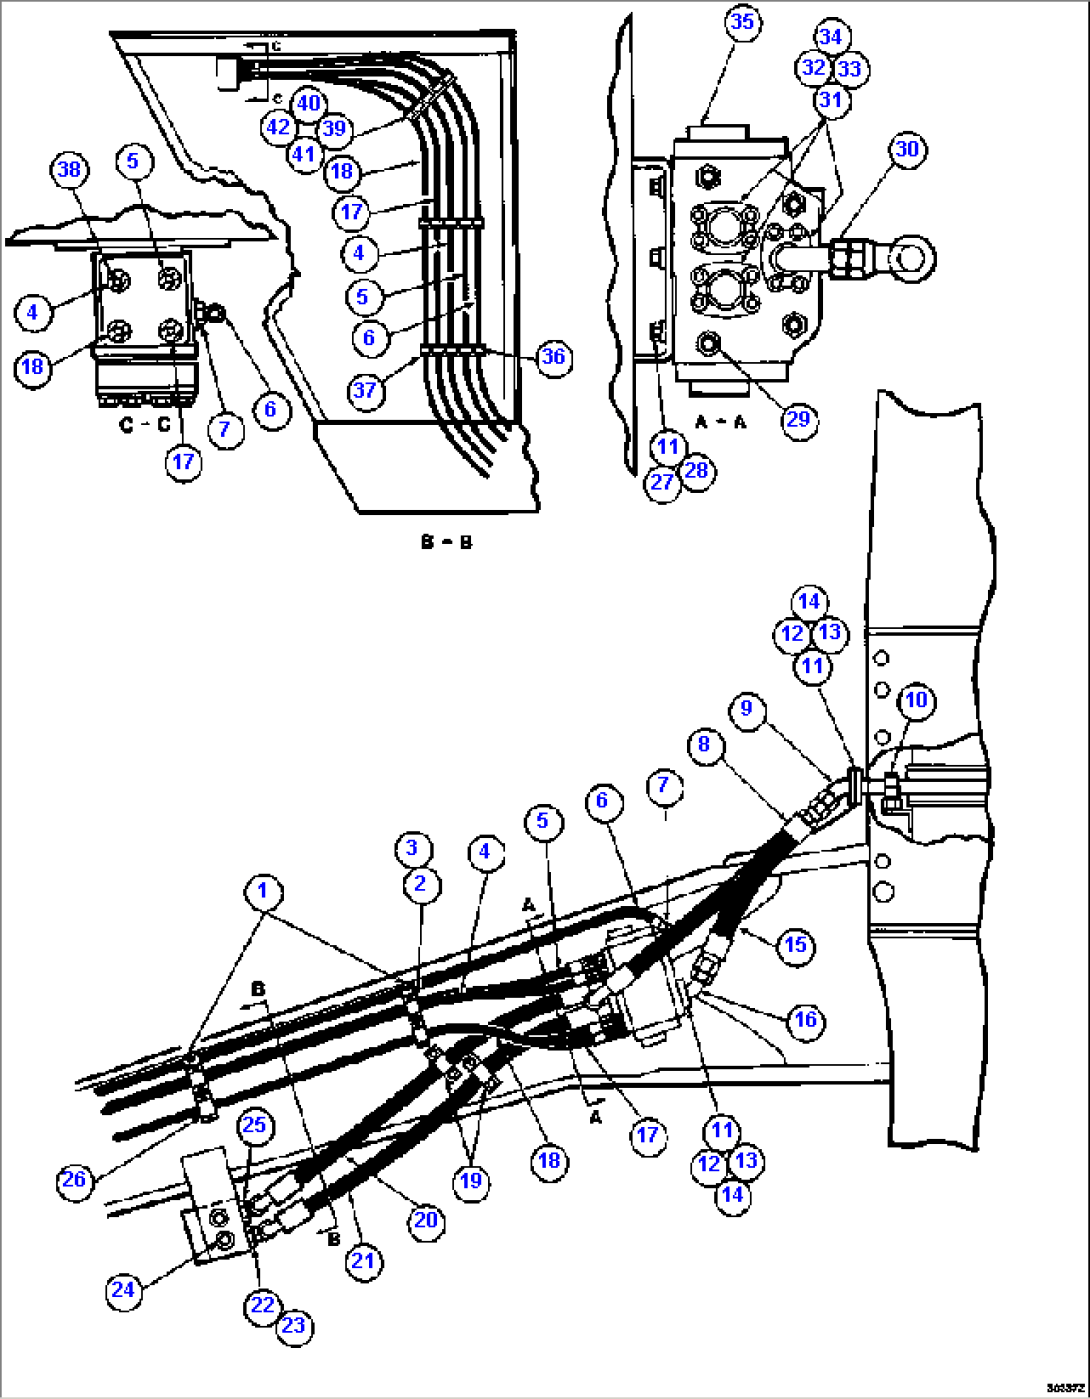 STEERING SYSTEM PIPING 1/2